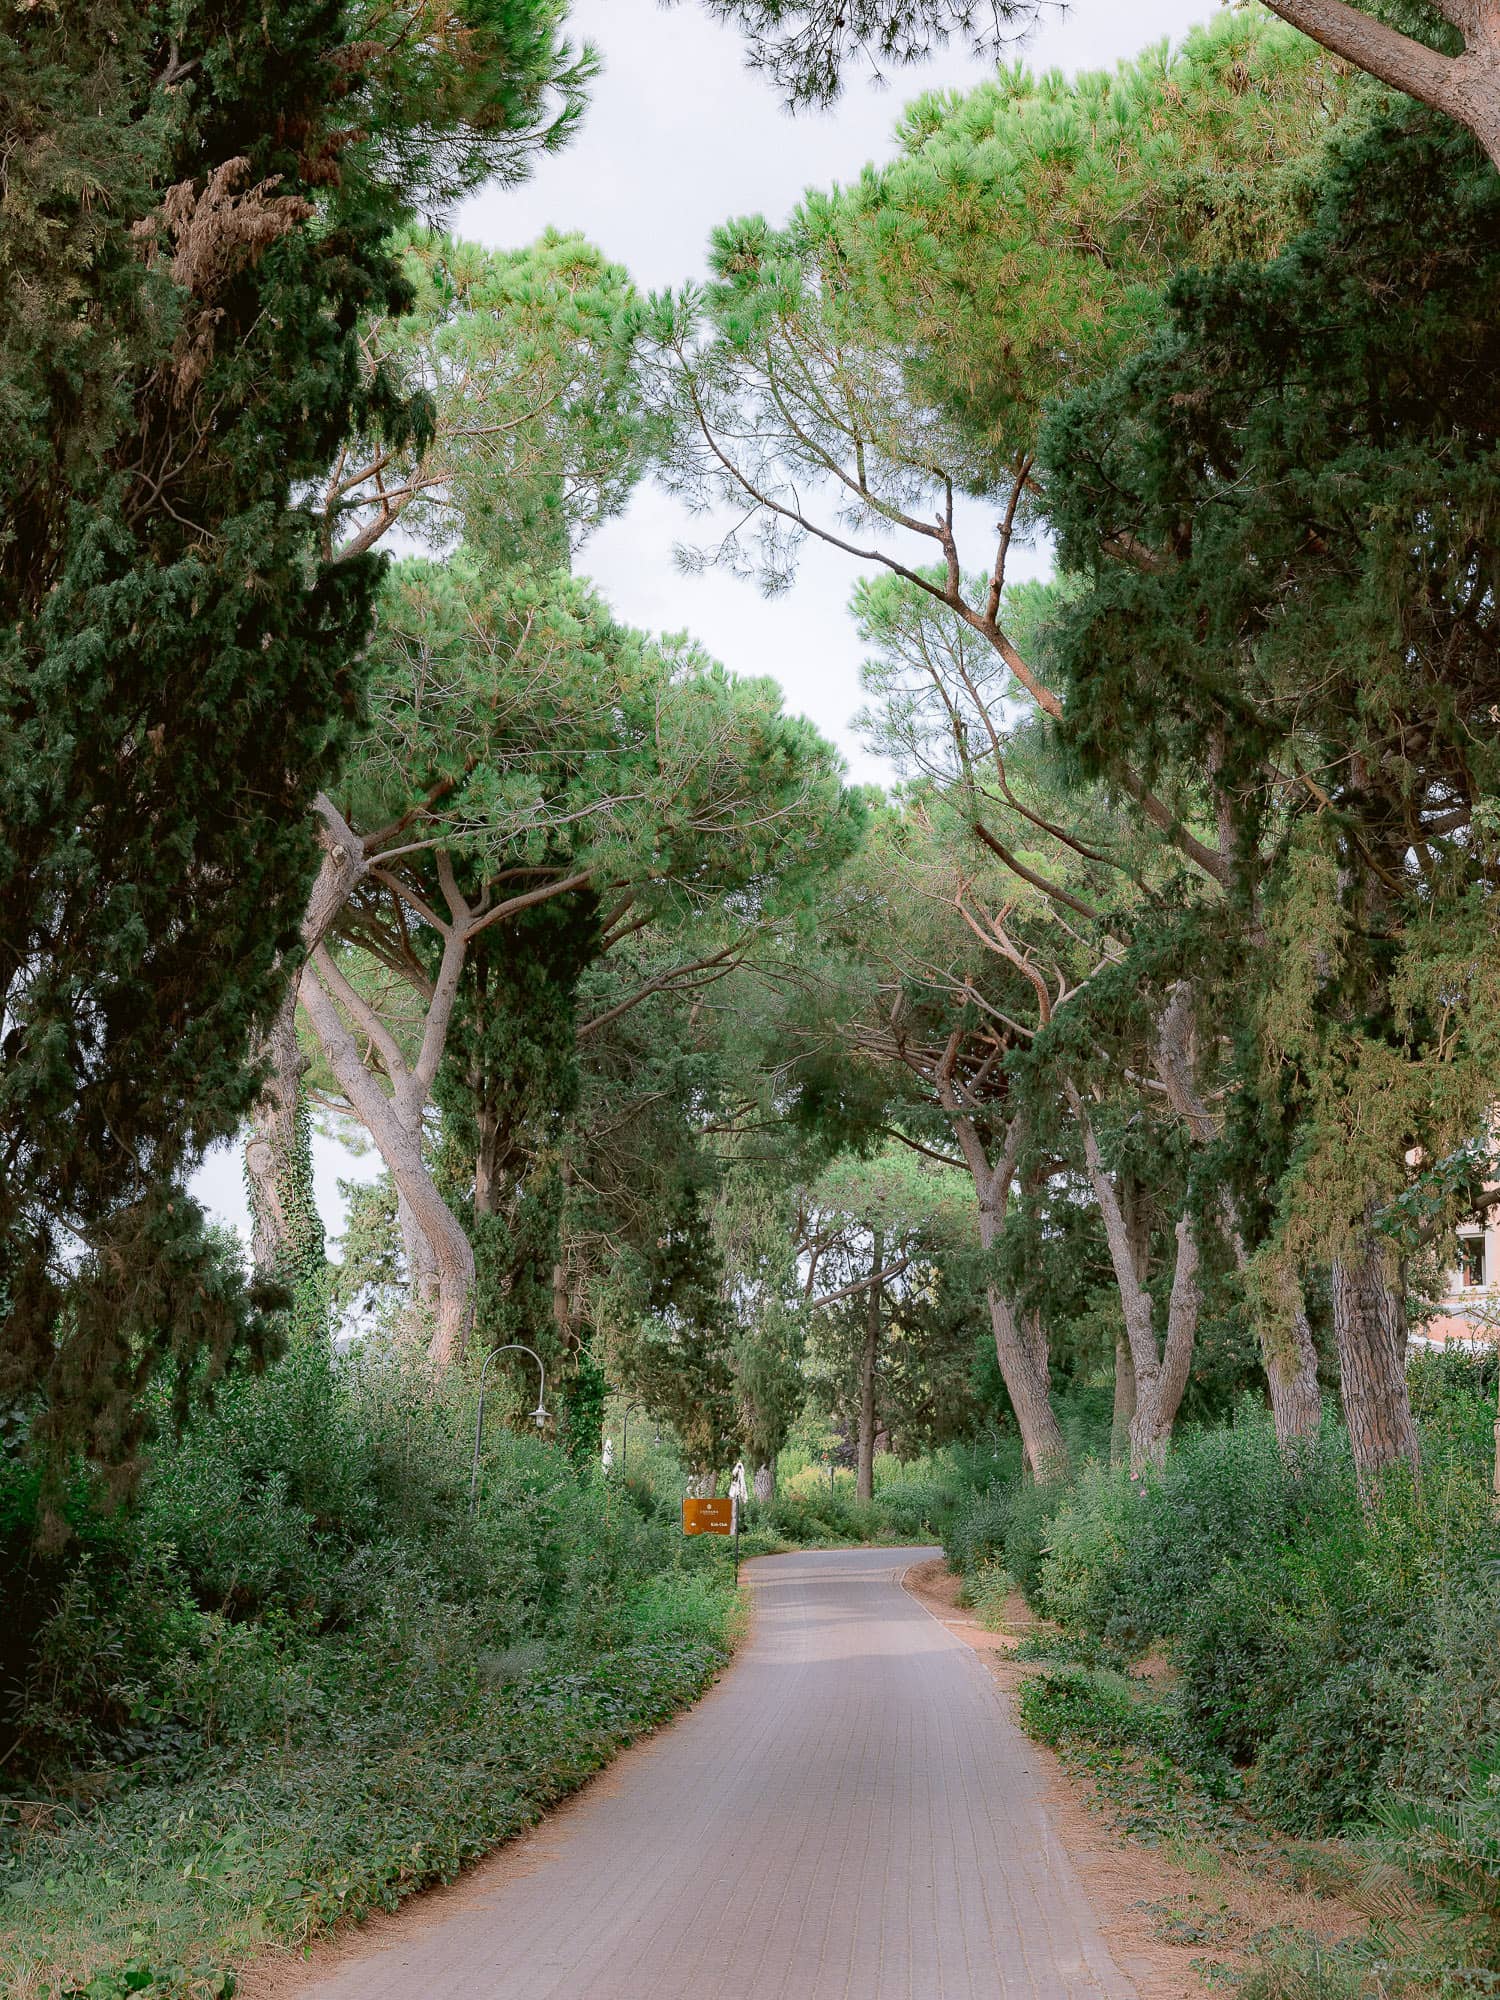 vegetation all around the road in the property of l'andana in maremma